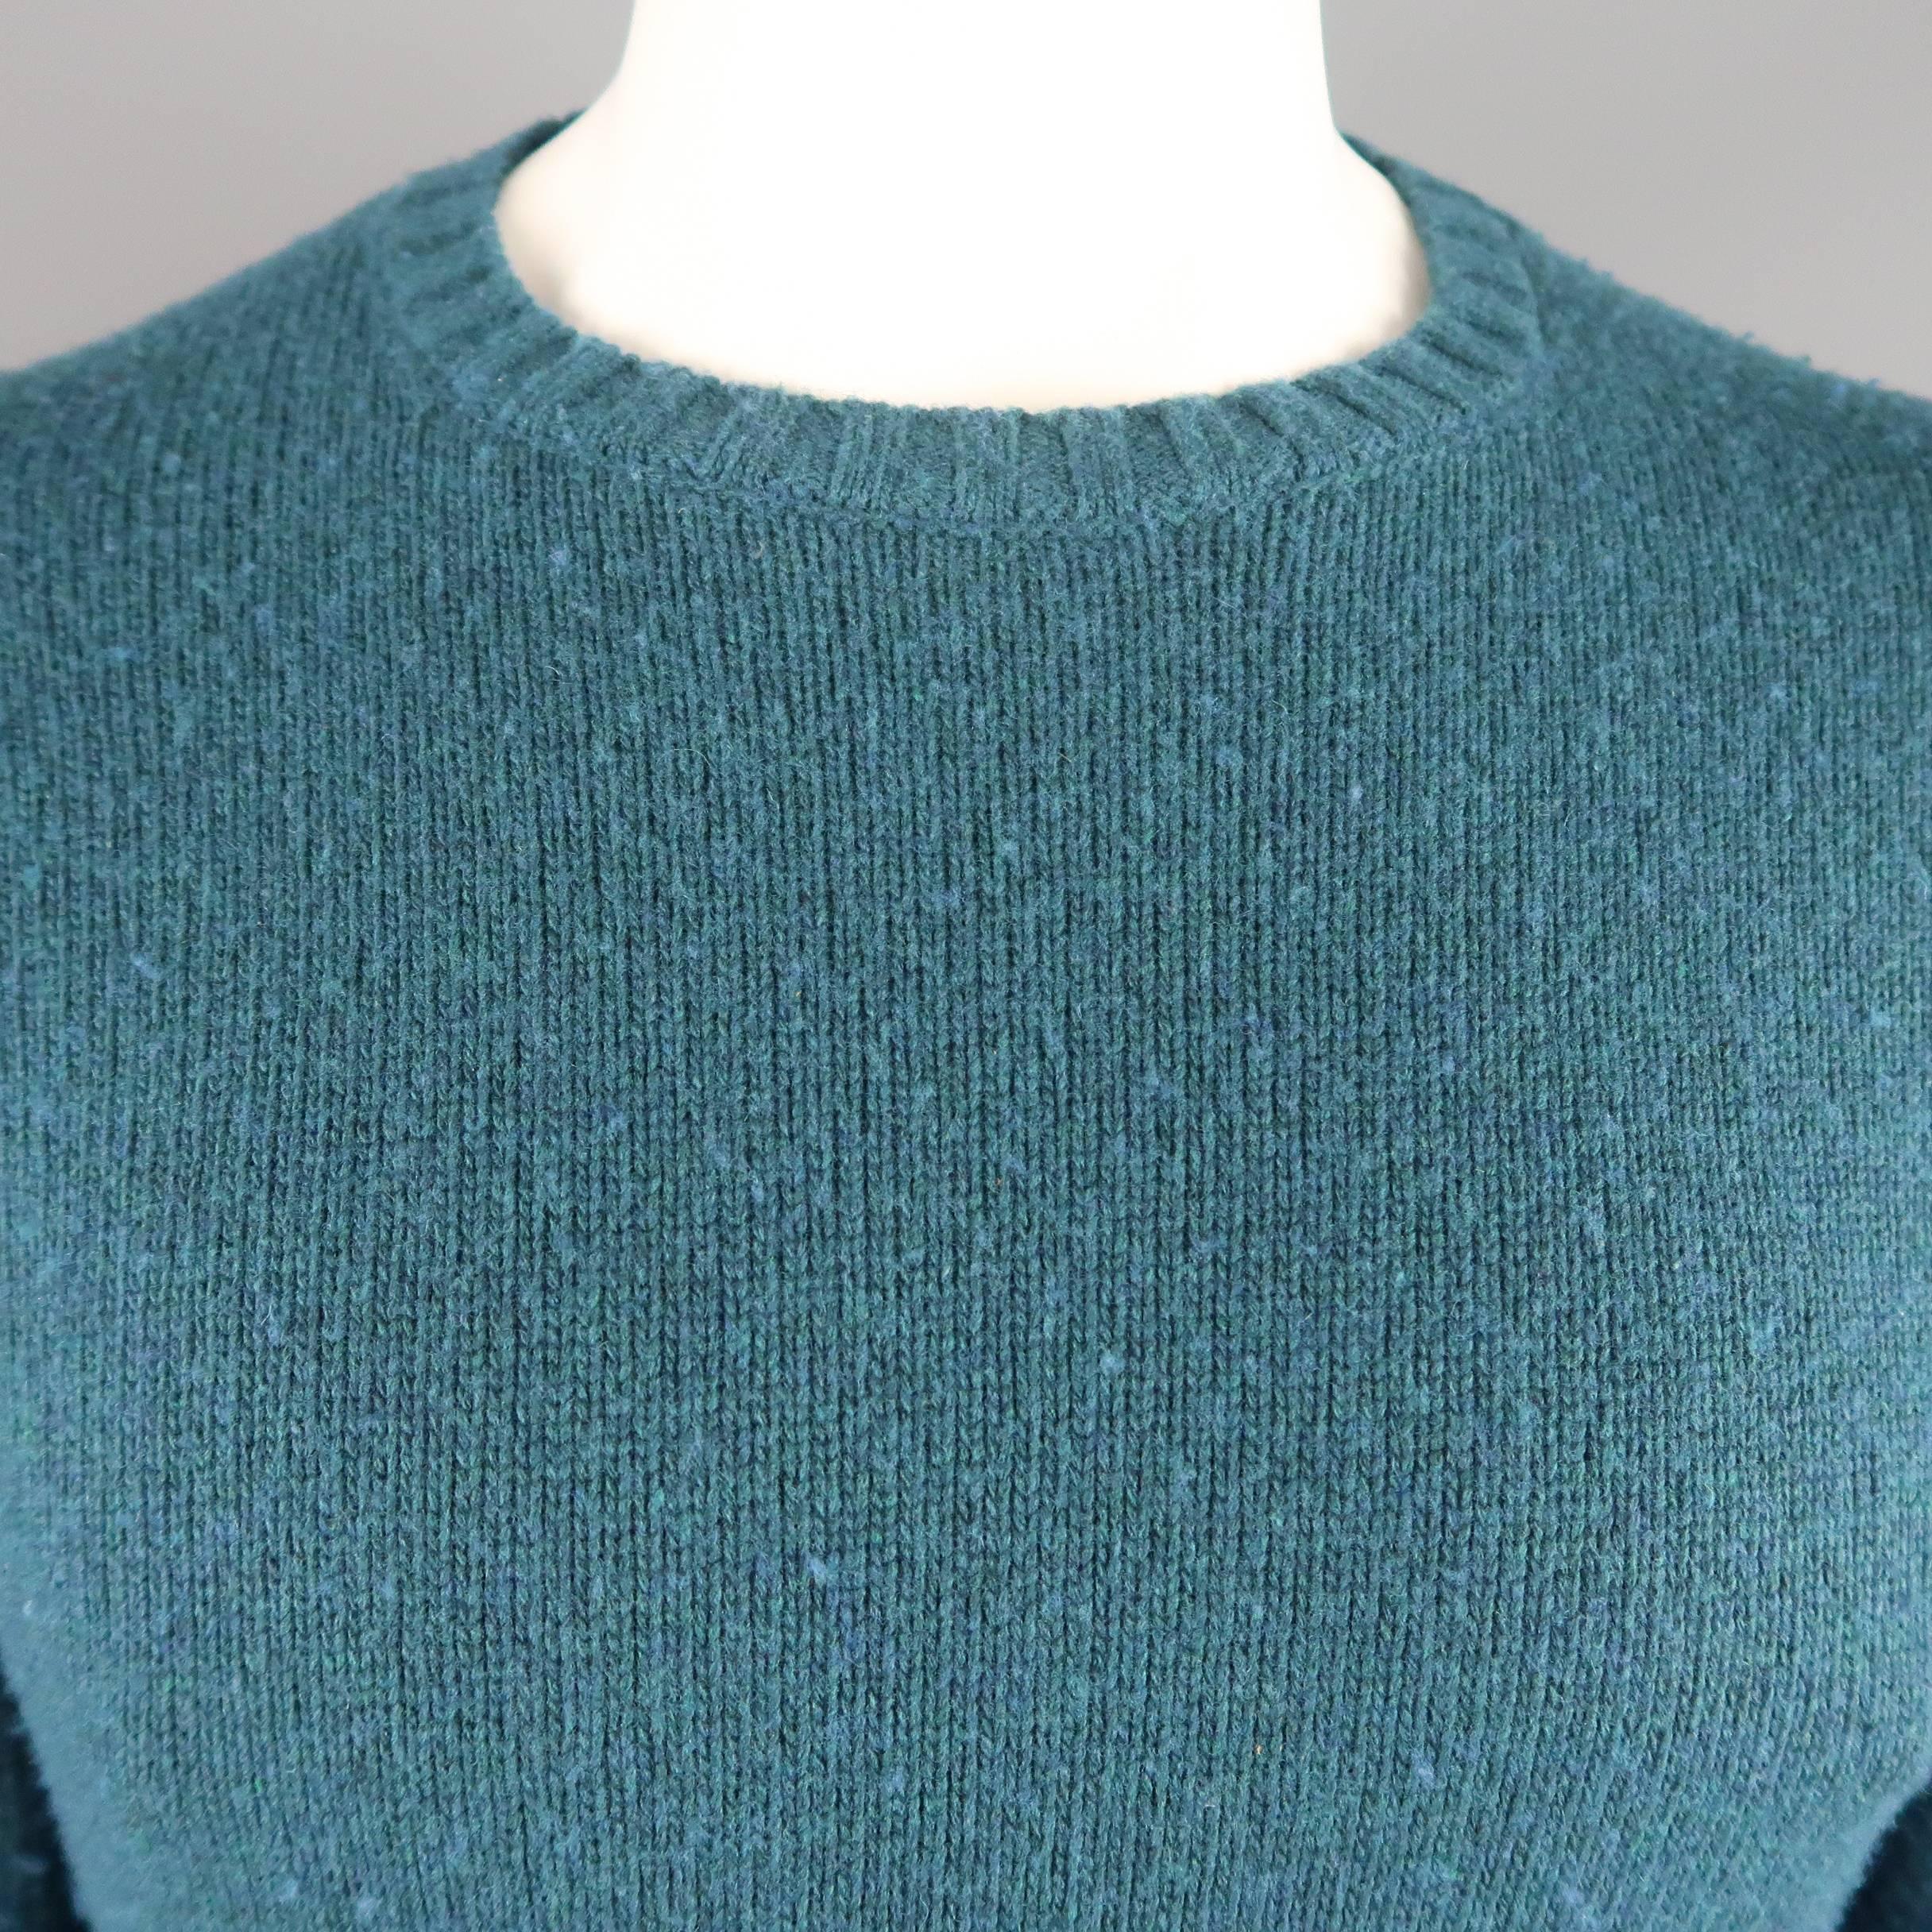 MAISON MARTIN MARGIELA pullover sweater comes in teal heather wool blend knit with a crewneck and back stitches. Wear throughout. As-is. Made in Italy.
 
Fair Pre-Owned Condition.
Marked: (no size)
 
Measurements:
 
Shoulder: 17 in.
Chest: 42